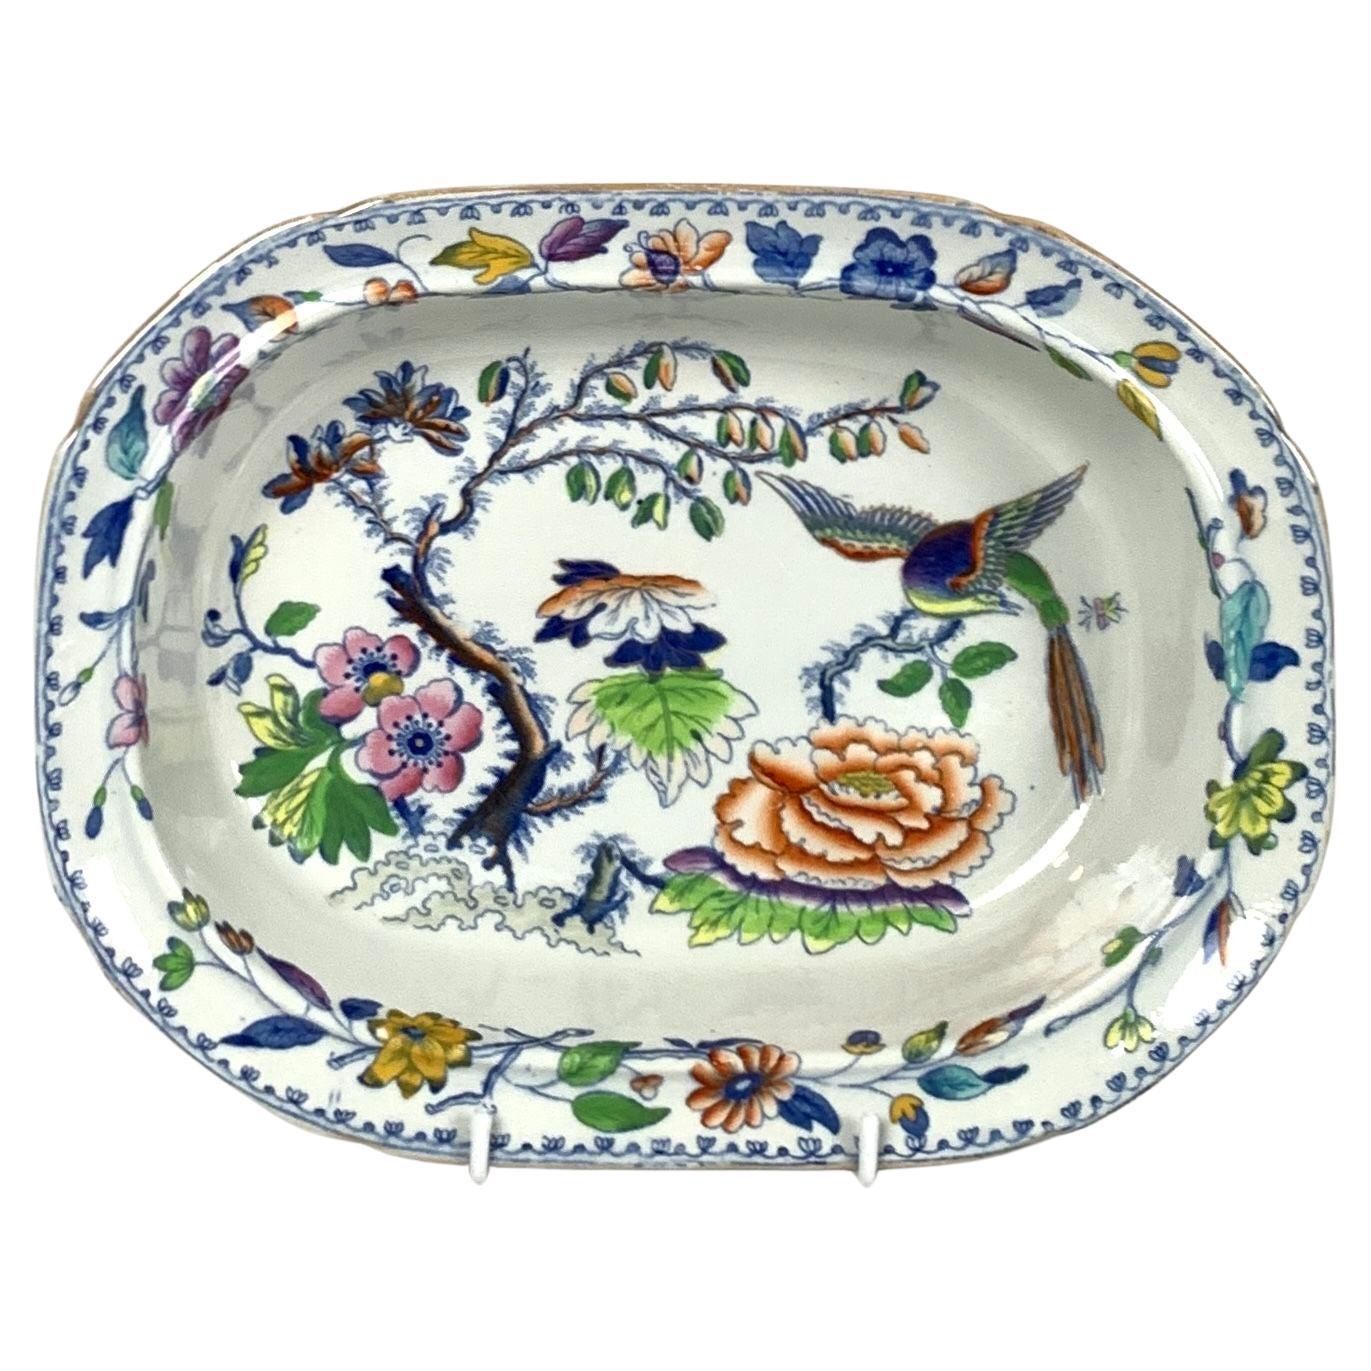 Flying Bird Pattern Oval Bowl Made by Davenport Porcelain England Circa 1840 For Sale